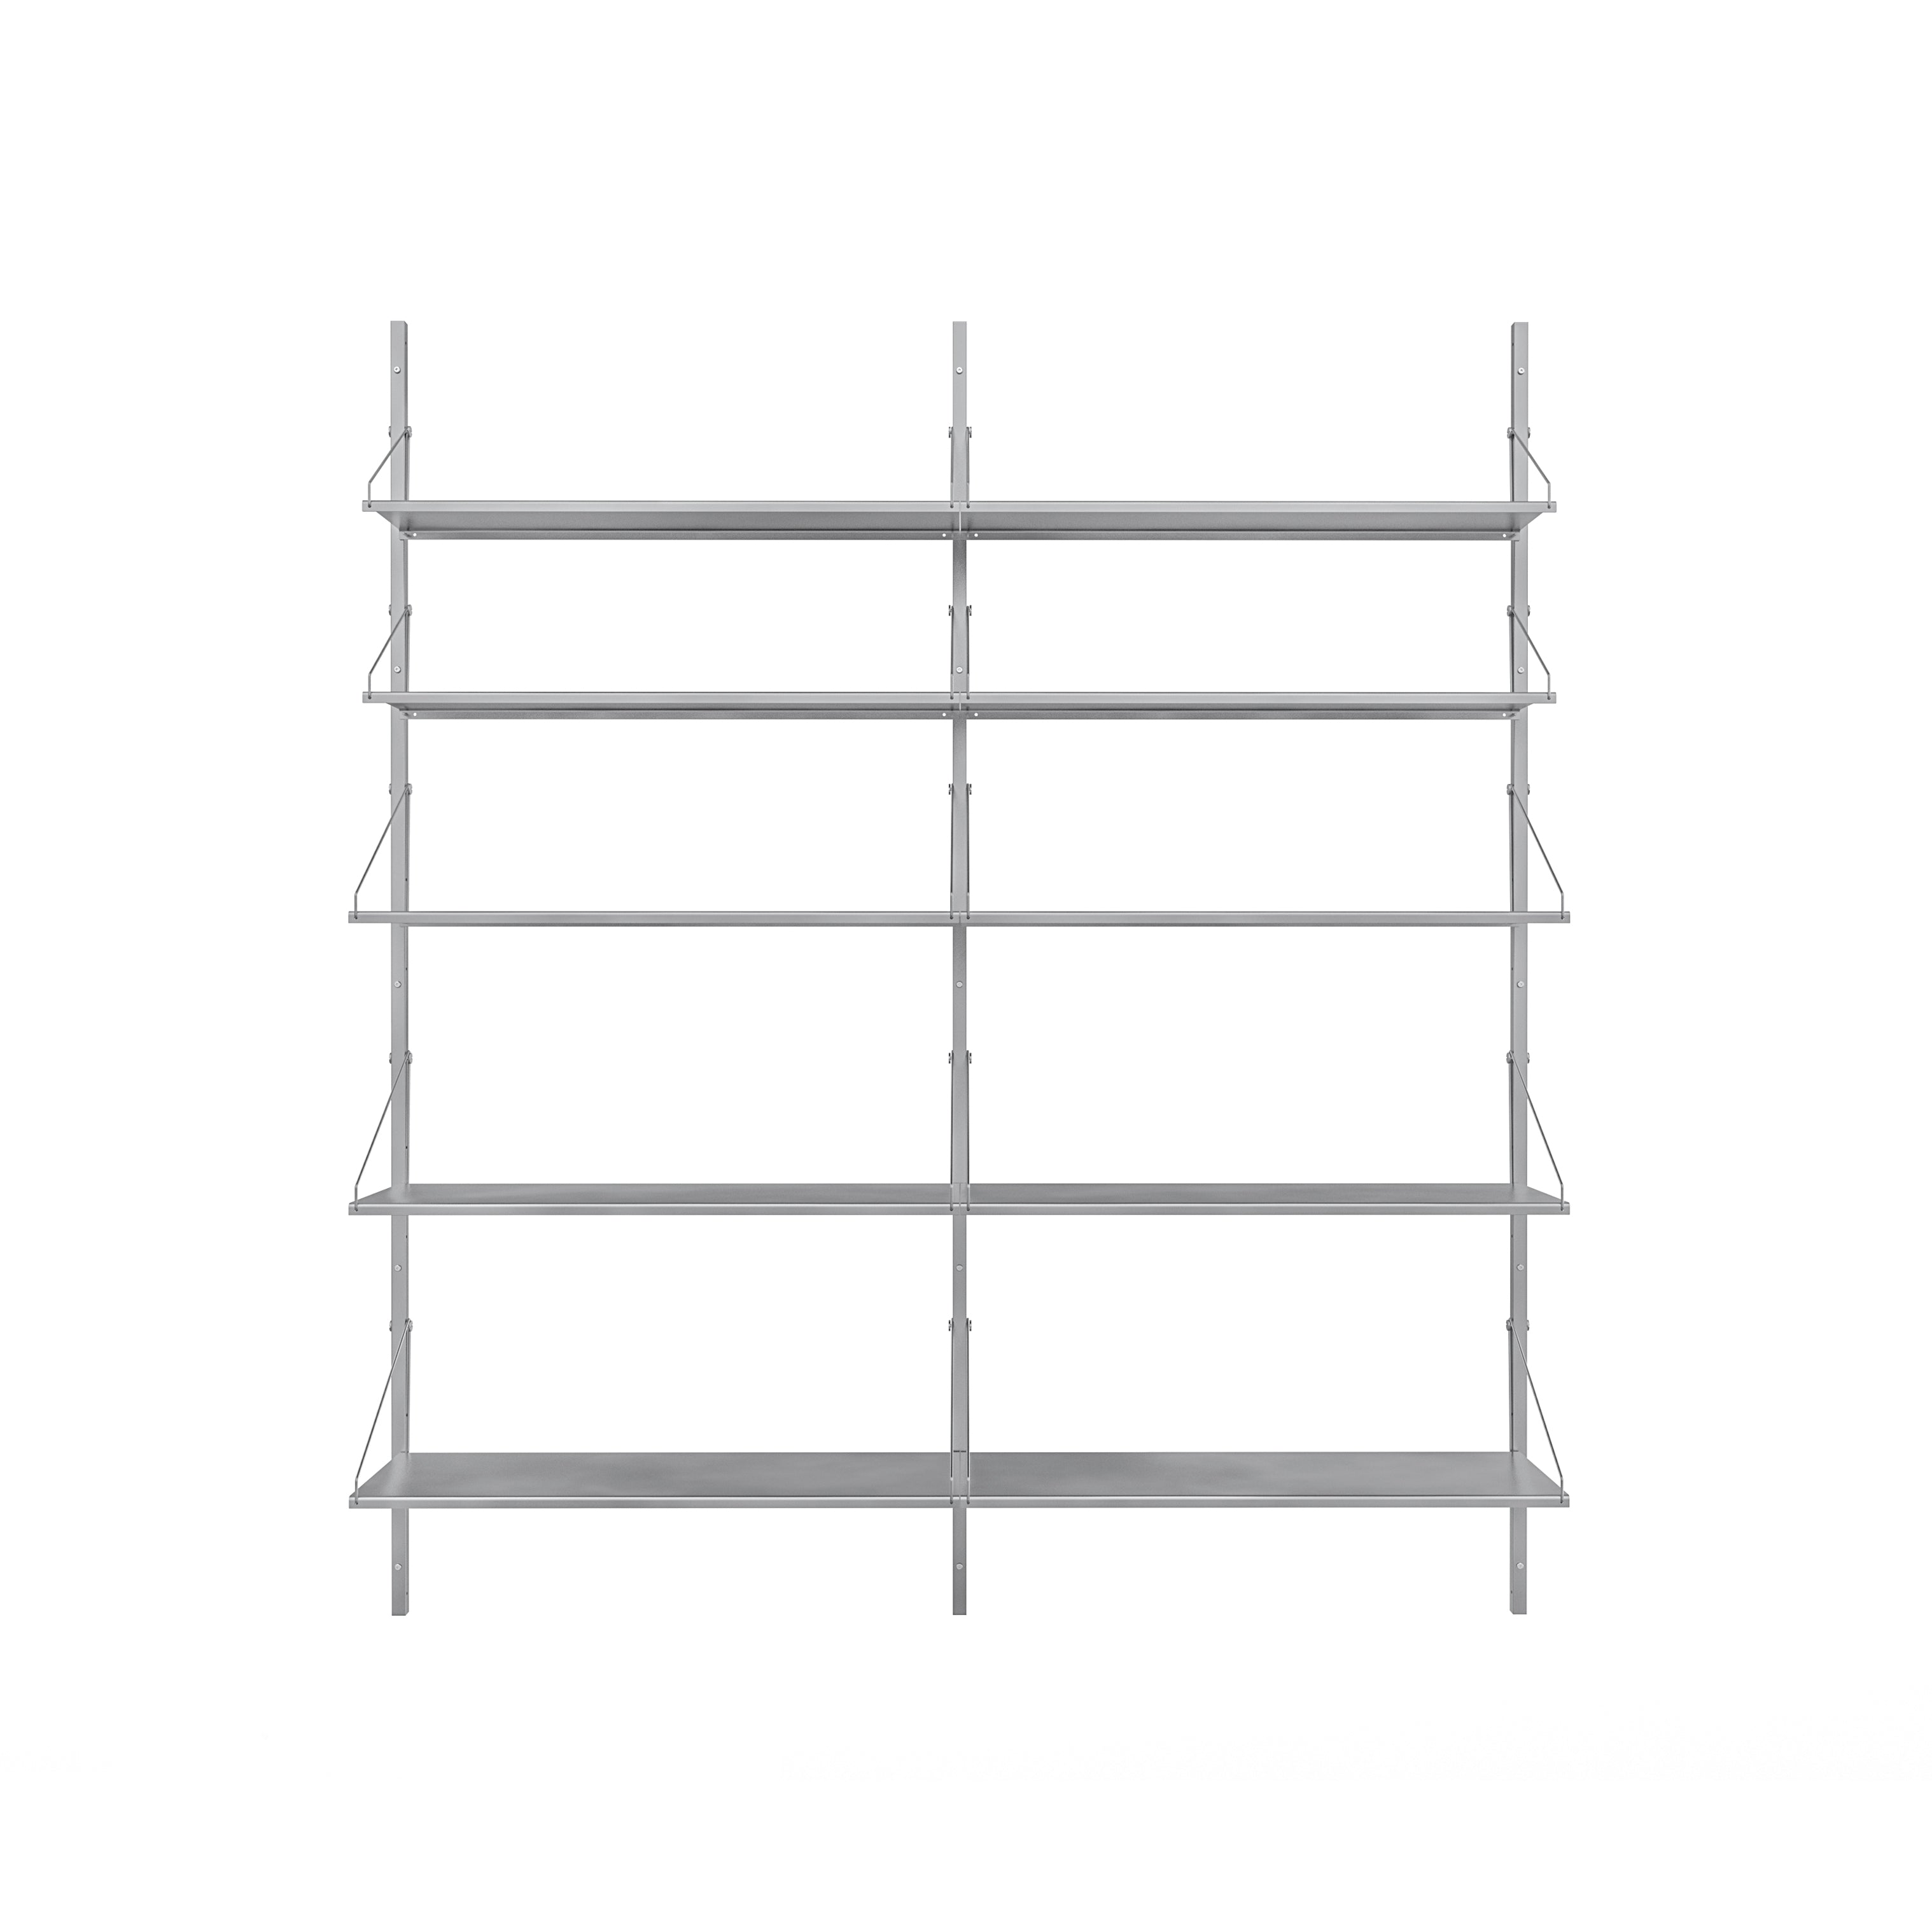 Shelf Library: Steel + High (W80) + Double Section + Stainless Steel